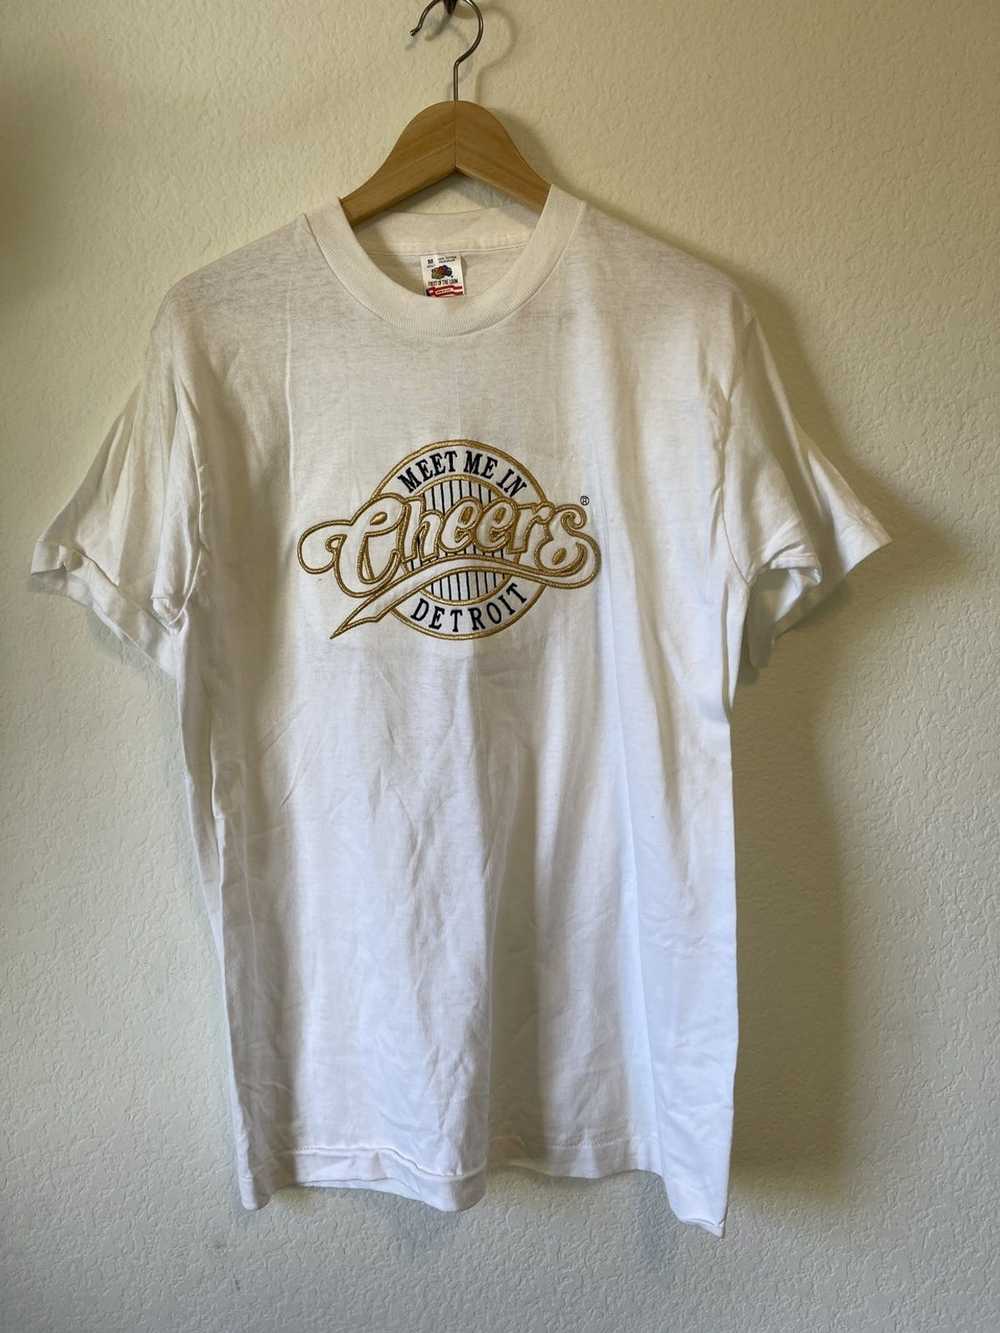 Vintage VNTG Cheers Motion Picture Shirt - image 2